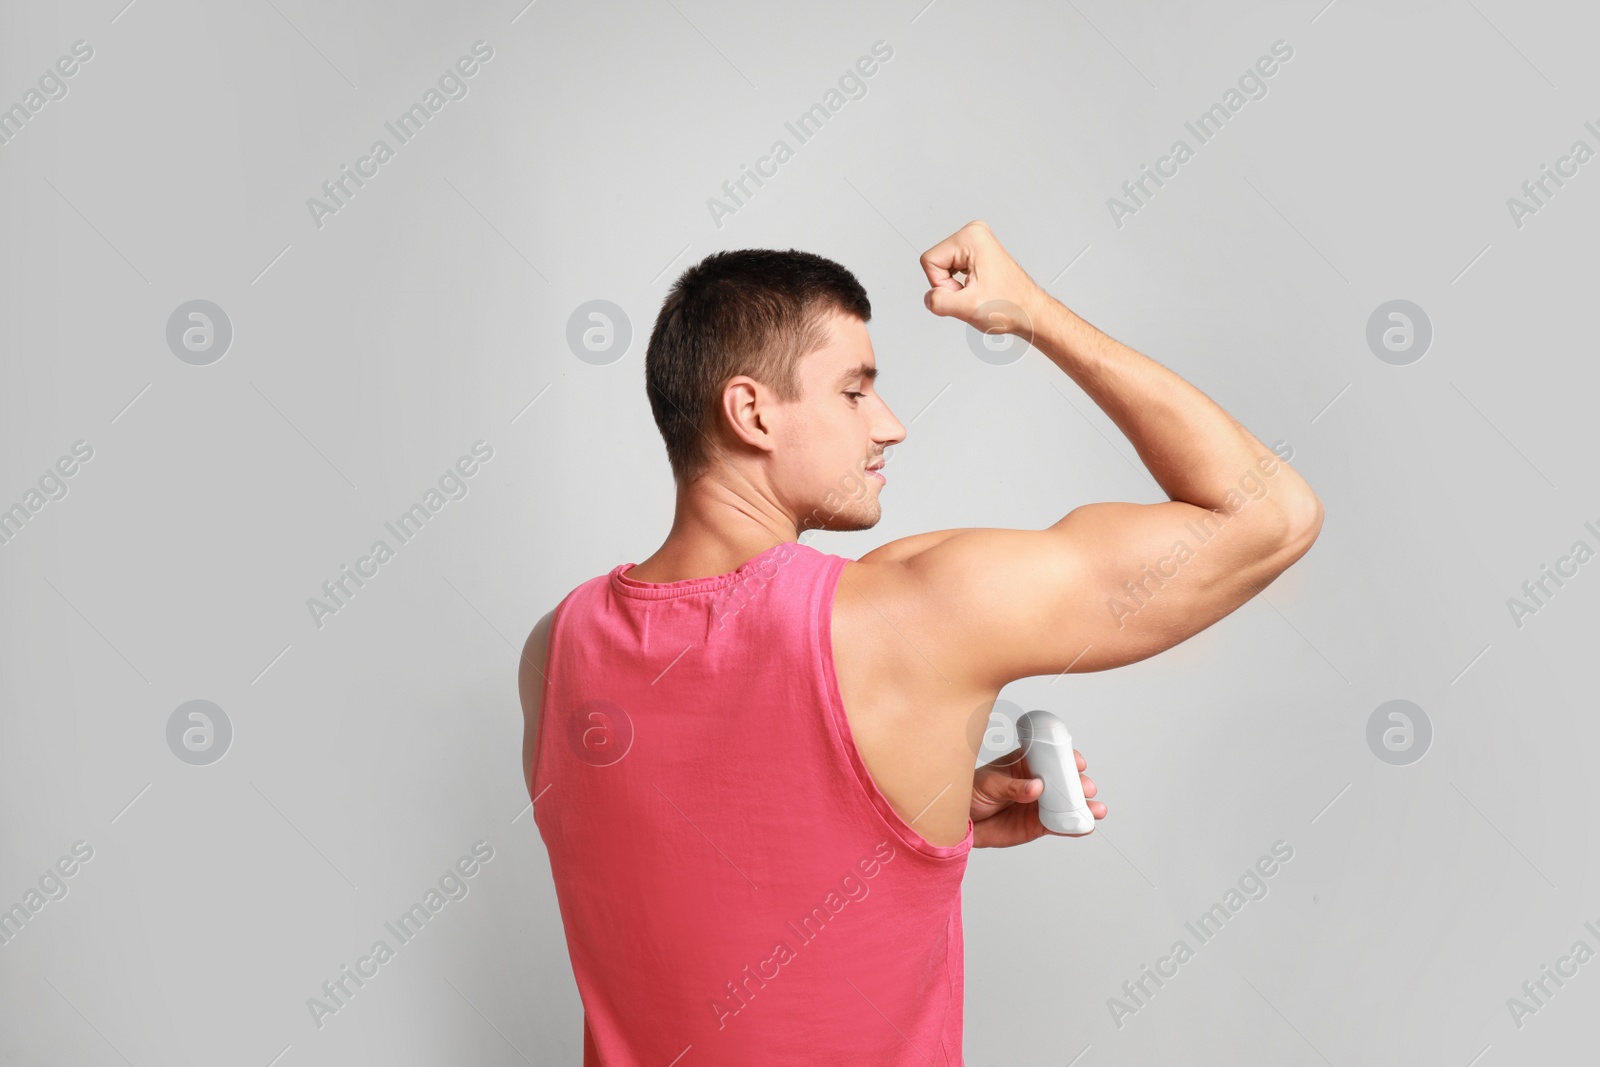 Photo of Young man applying deodorant to armpit on light background